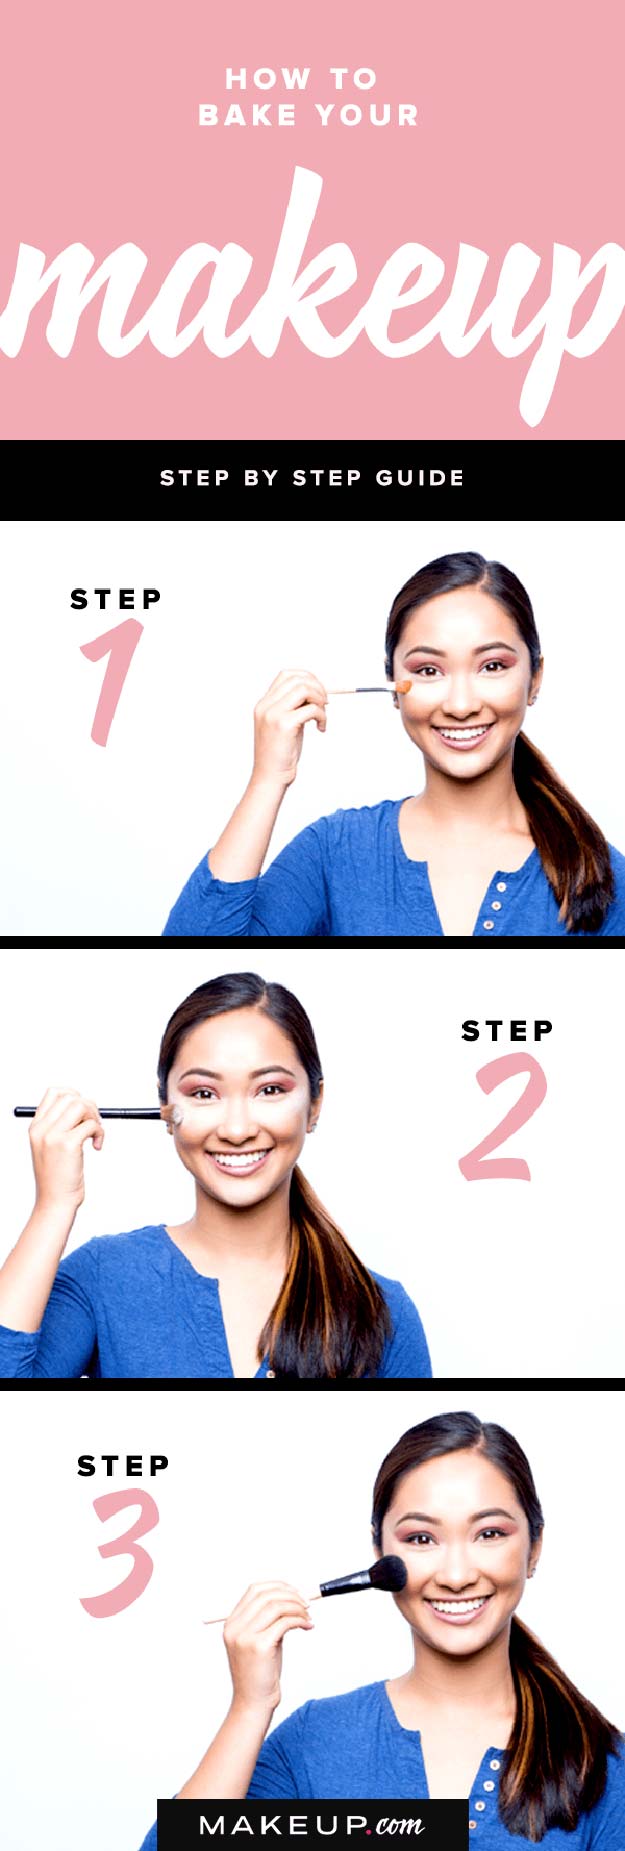 1-How-to-Bake-Your-Makeup